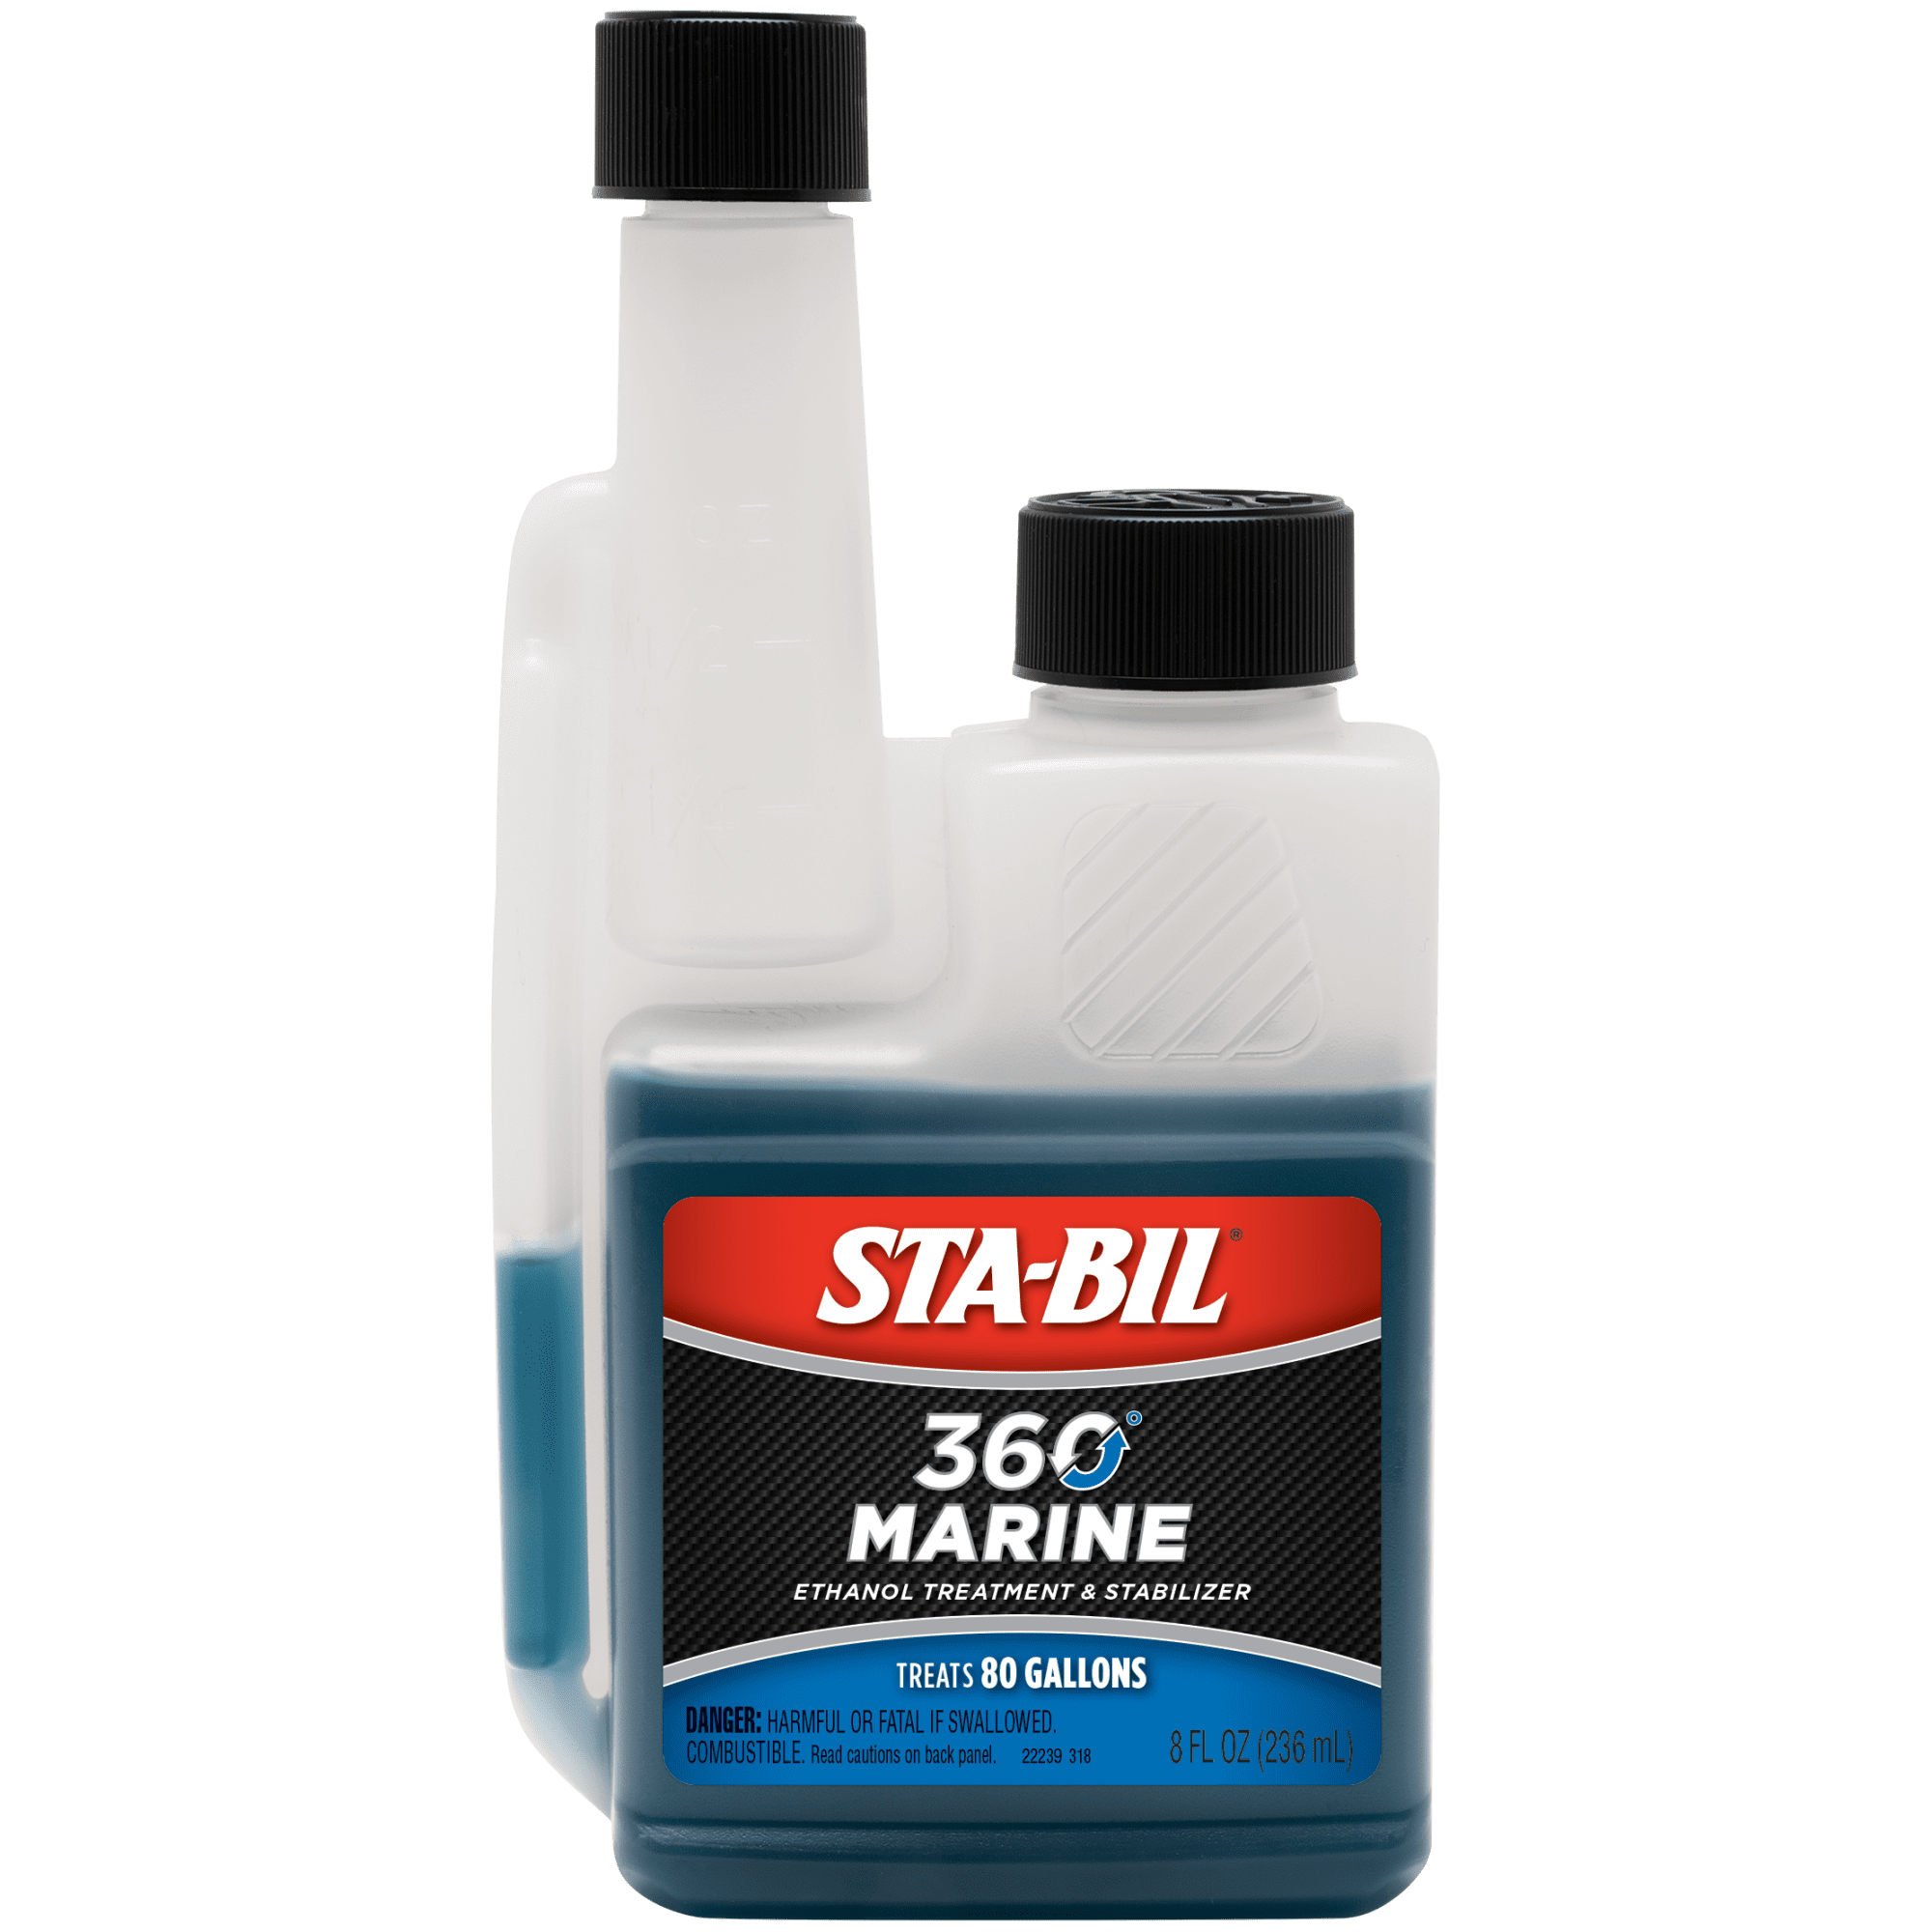 STA-BIL Storage Fuel Stabilizer - Keeps Fuel Fresh For Up To Two 